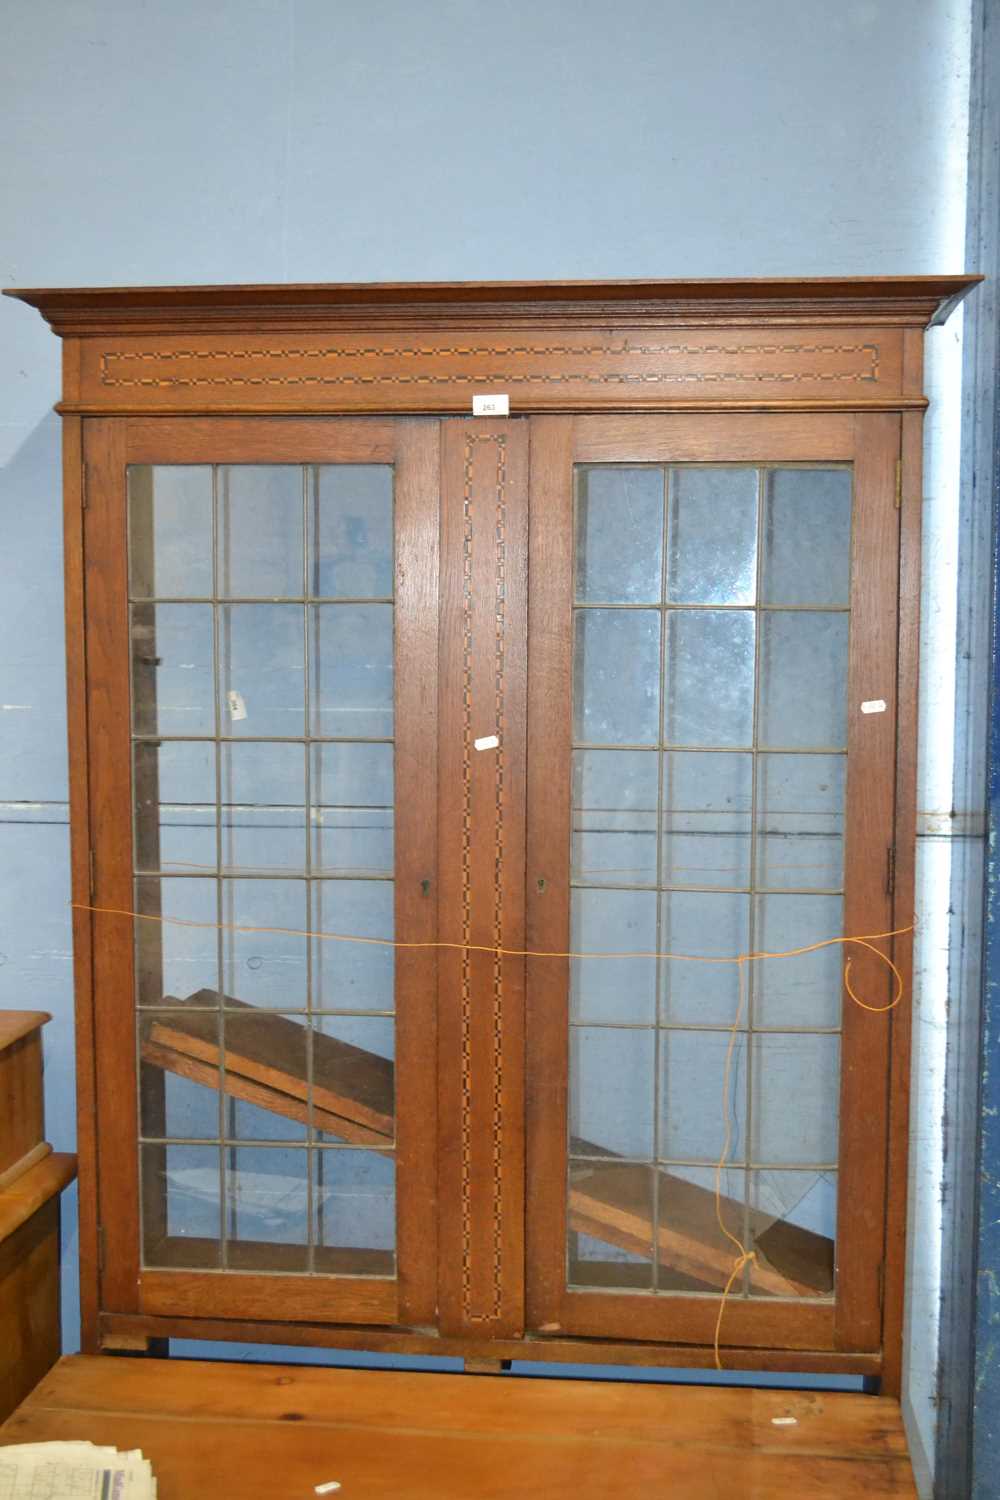 Late 19th or early 20th Century oak bookcase cabinet with lead glazed doors, damage to glass